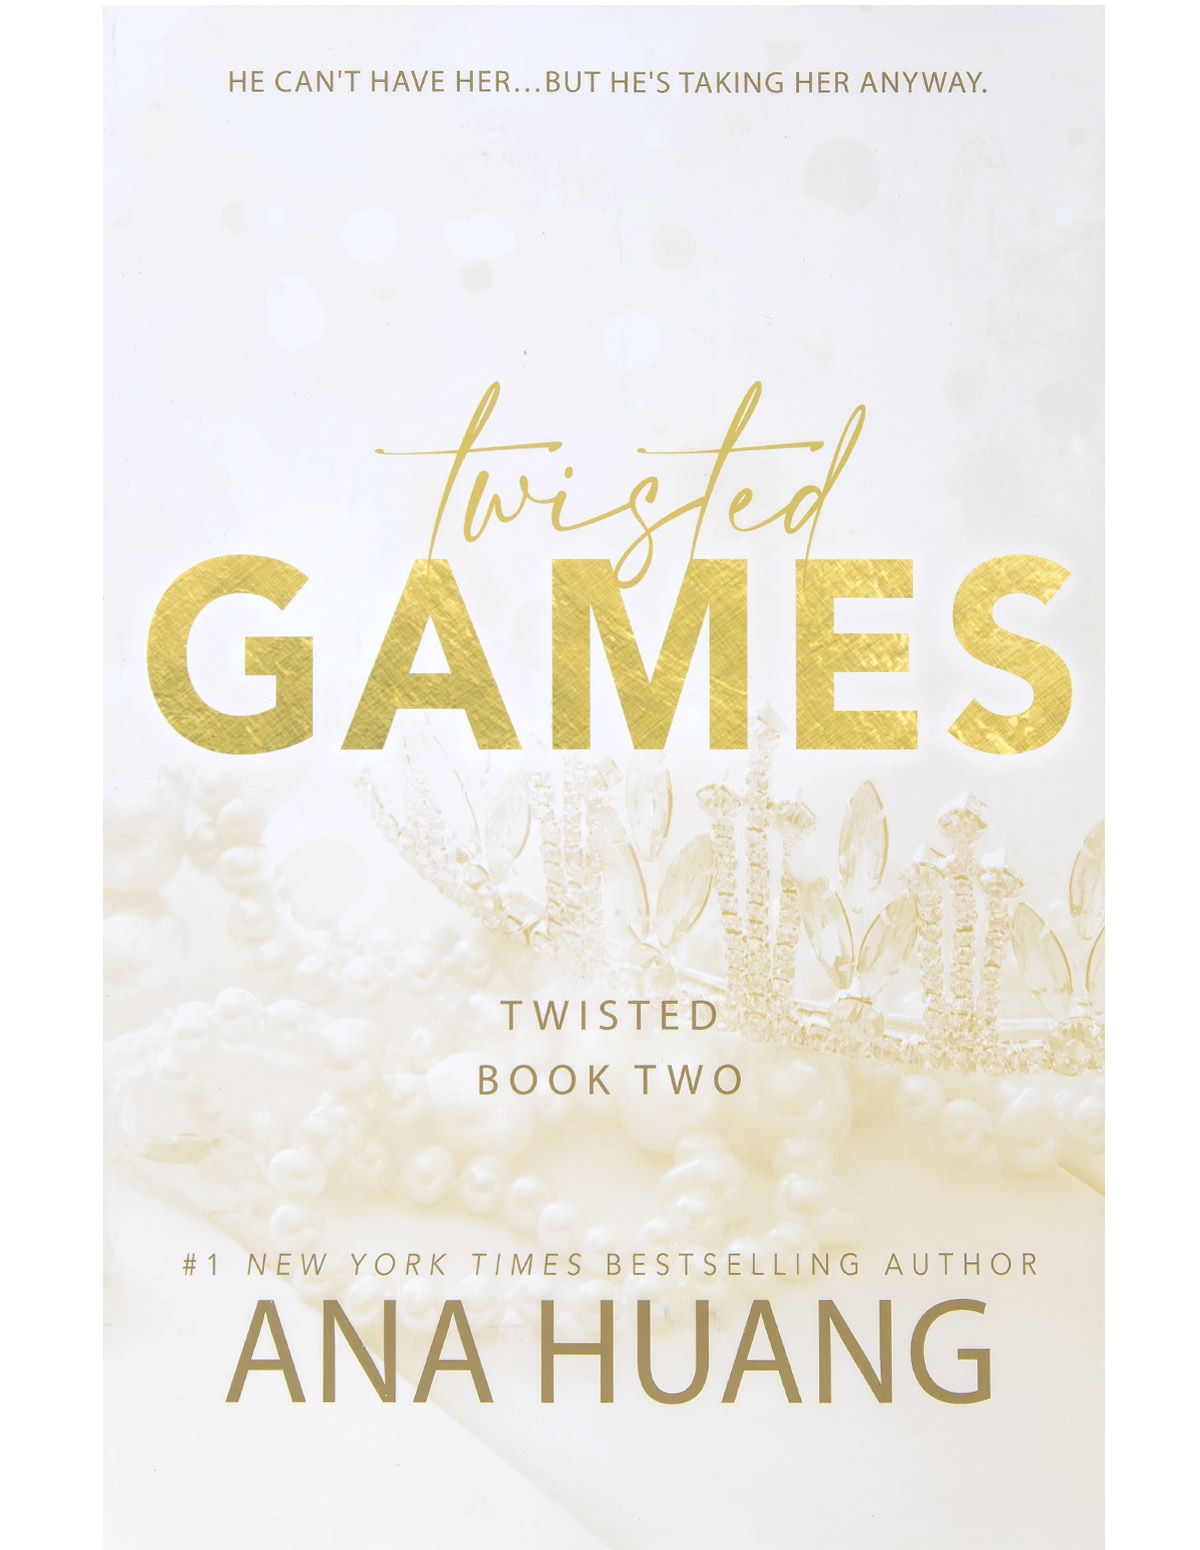 alternate image for Twisted Games Book - Ana Huang